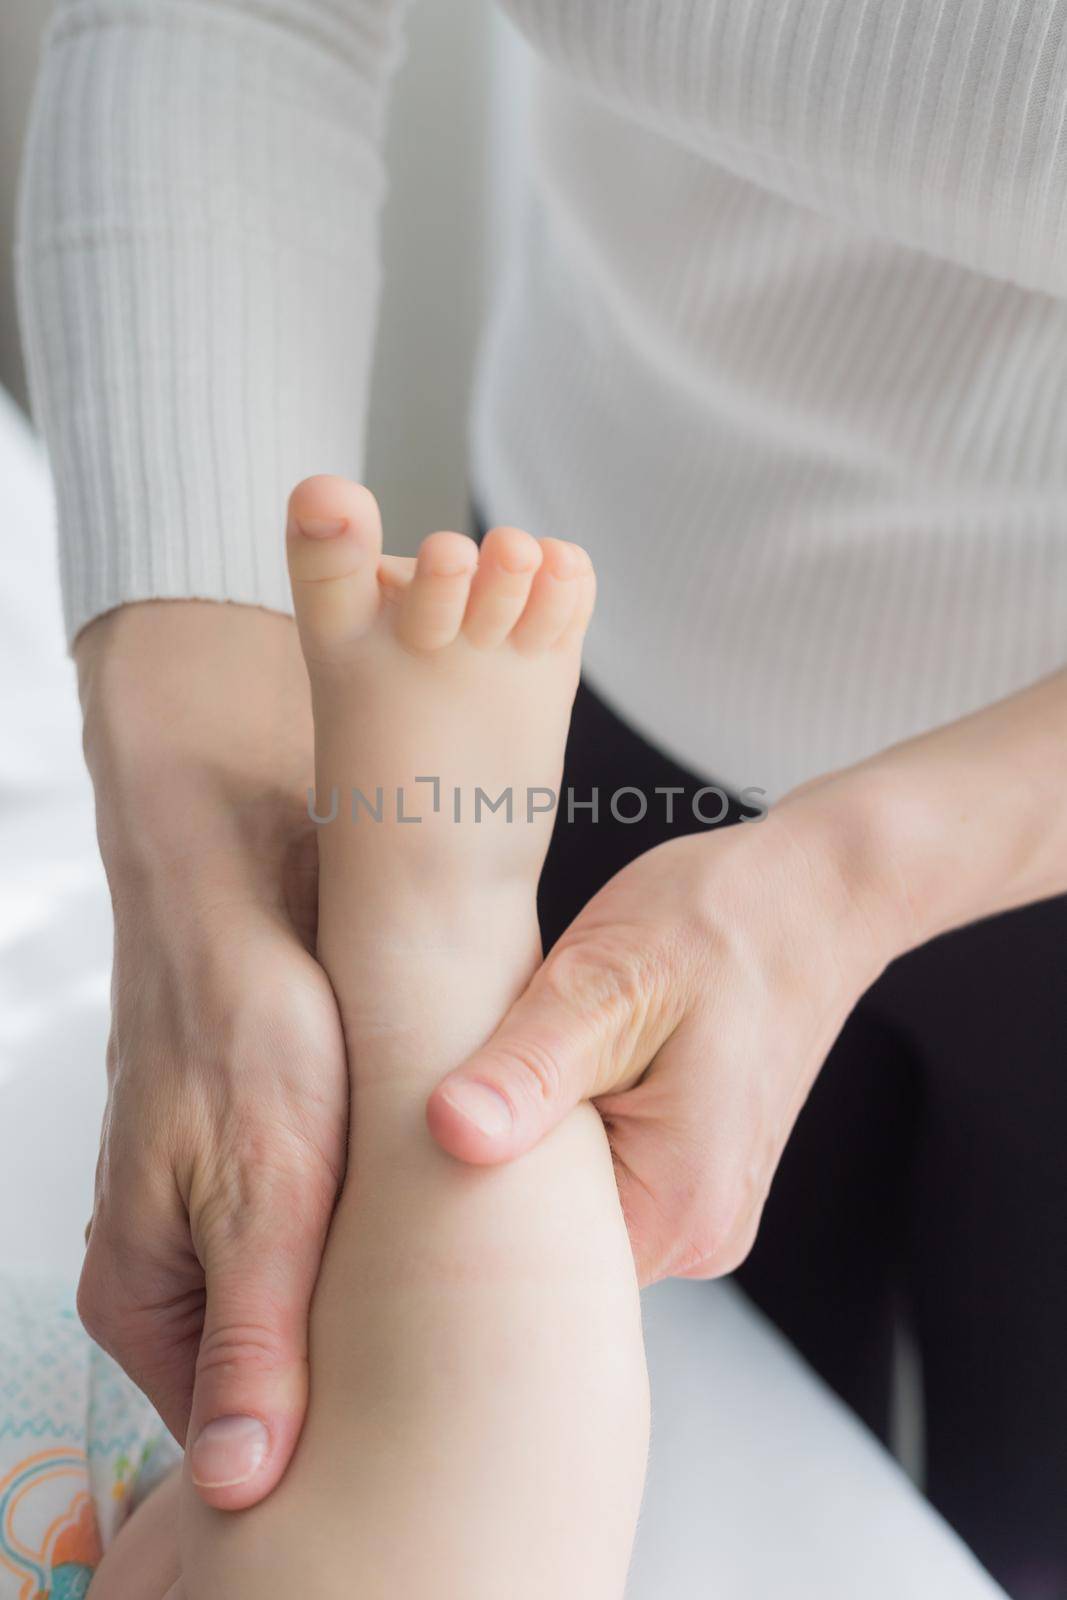 Mom gives her baby a leg and foot massage. Close-up. A satisfied baby lies on the massage table.